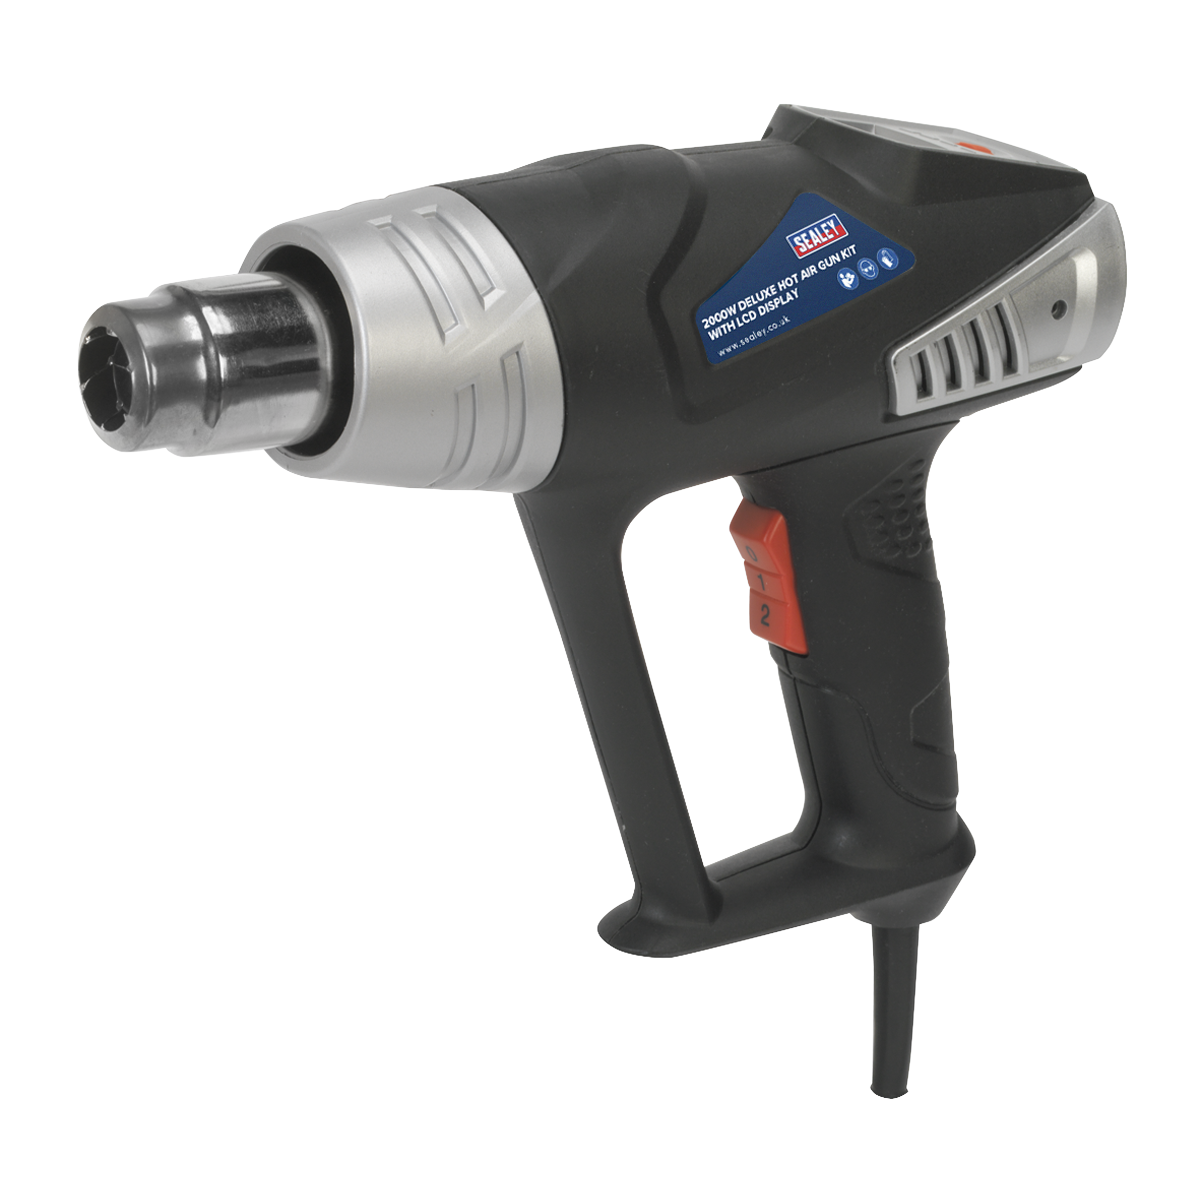 Deluxe Hot Air Gun Kit with LED Display 2000W 80-600°C